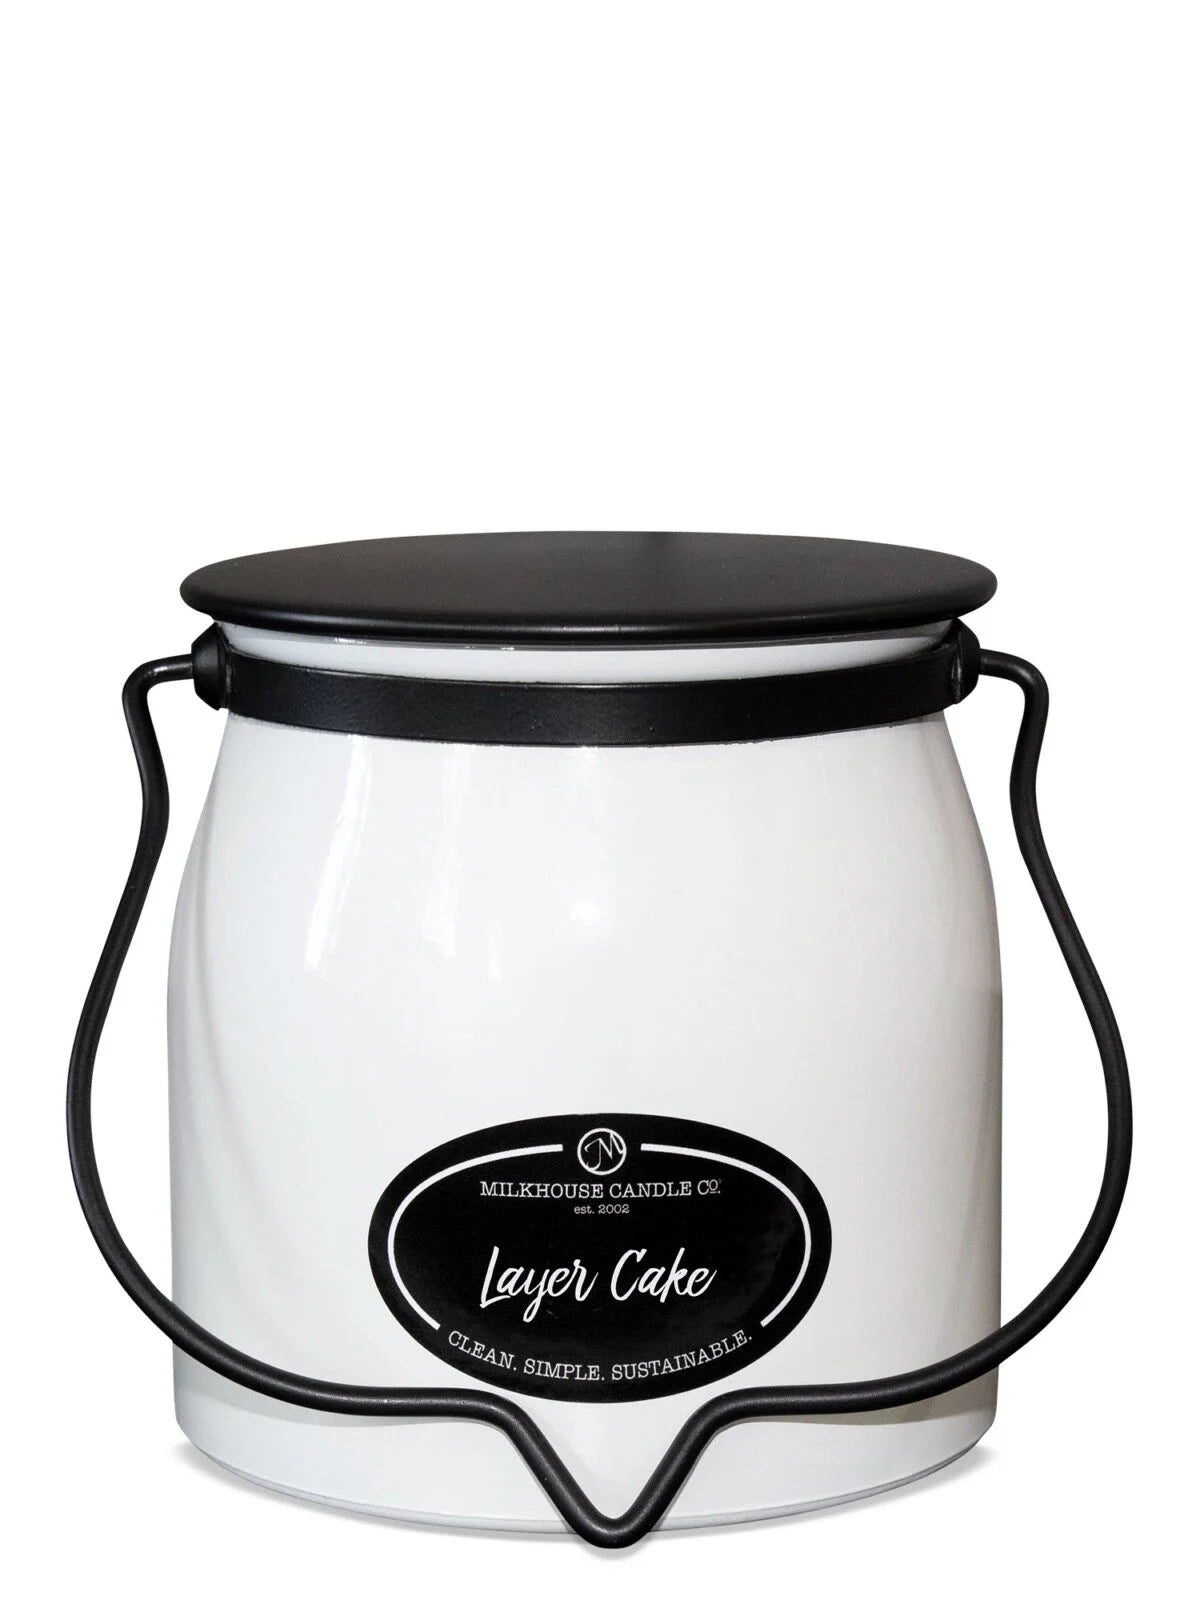 Layer Cake Milkhouse Butter Jar Candle 16oz